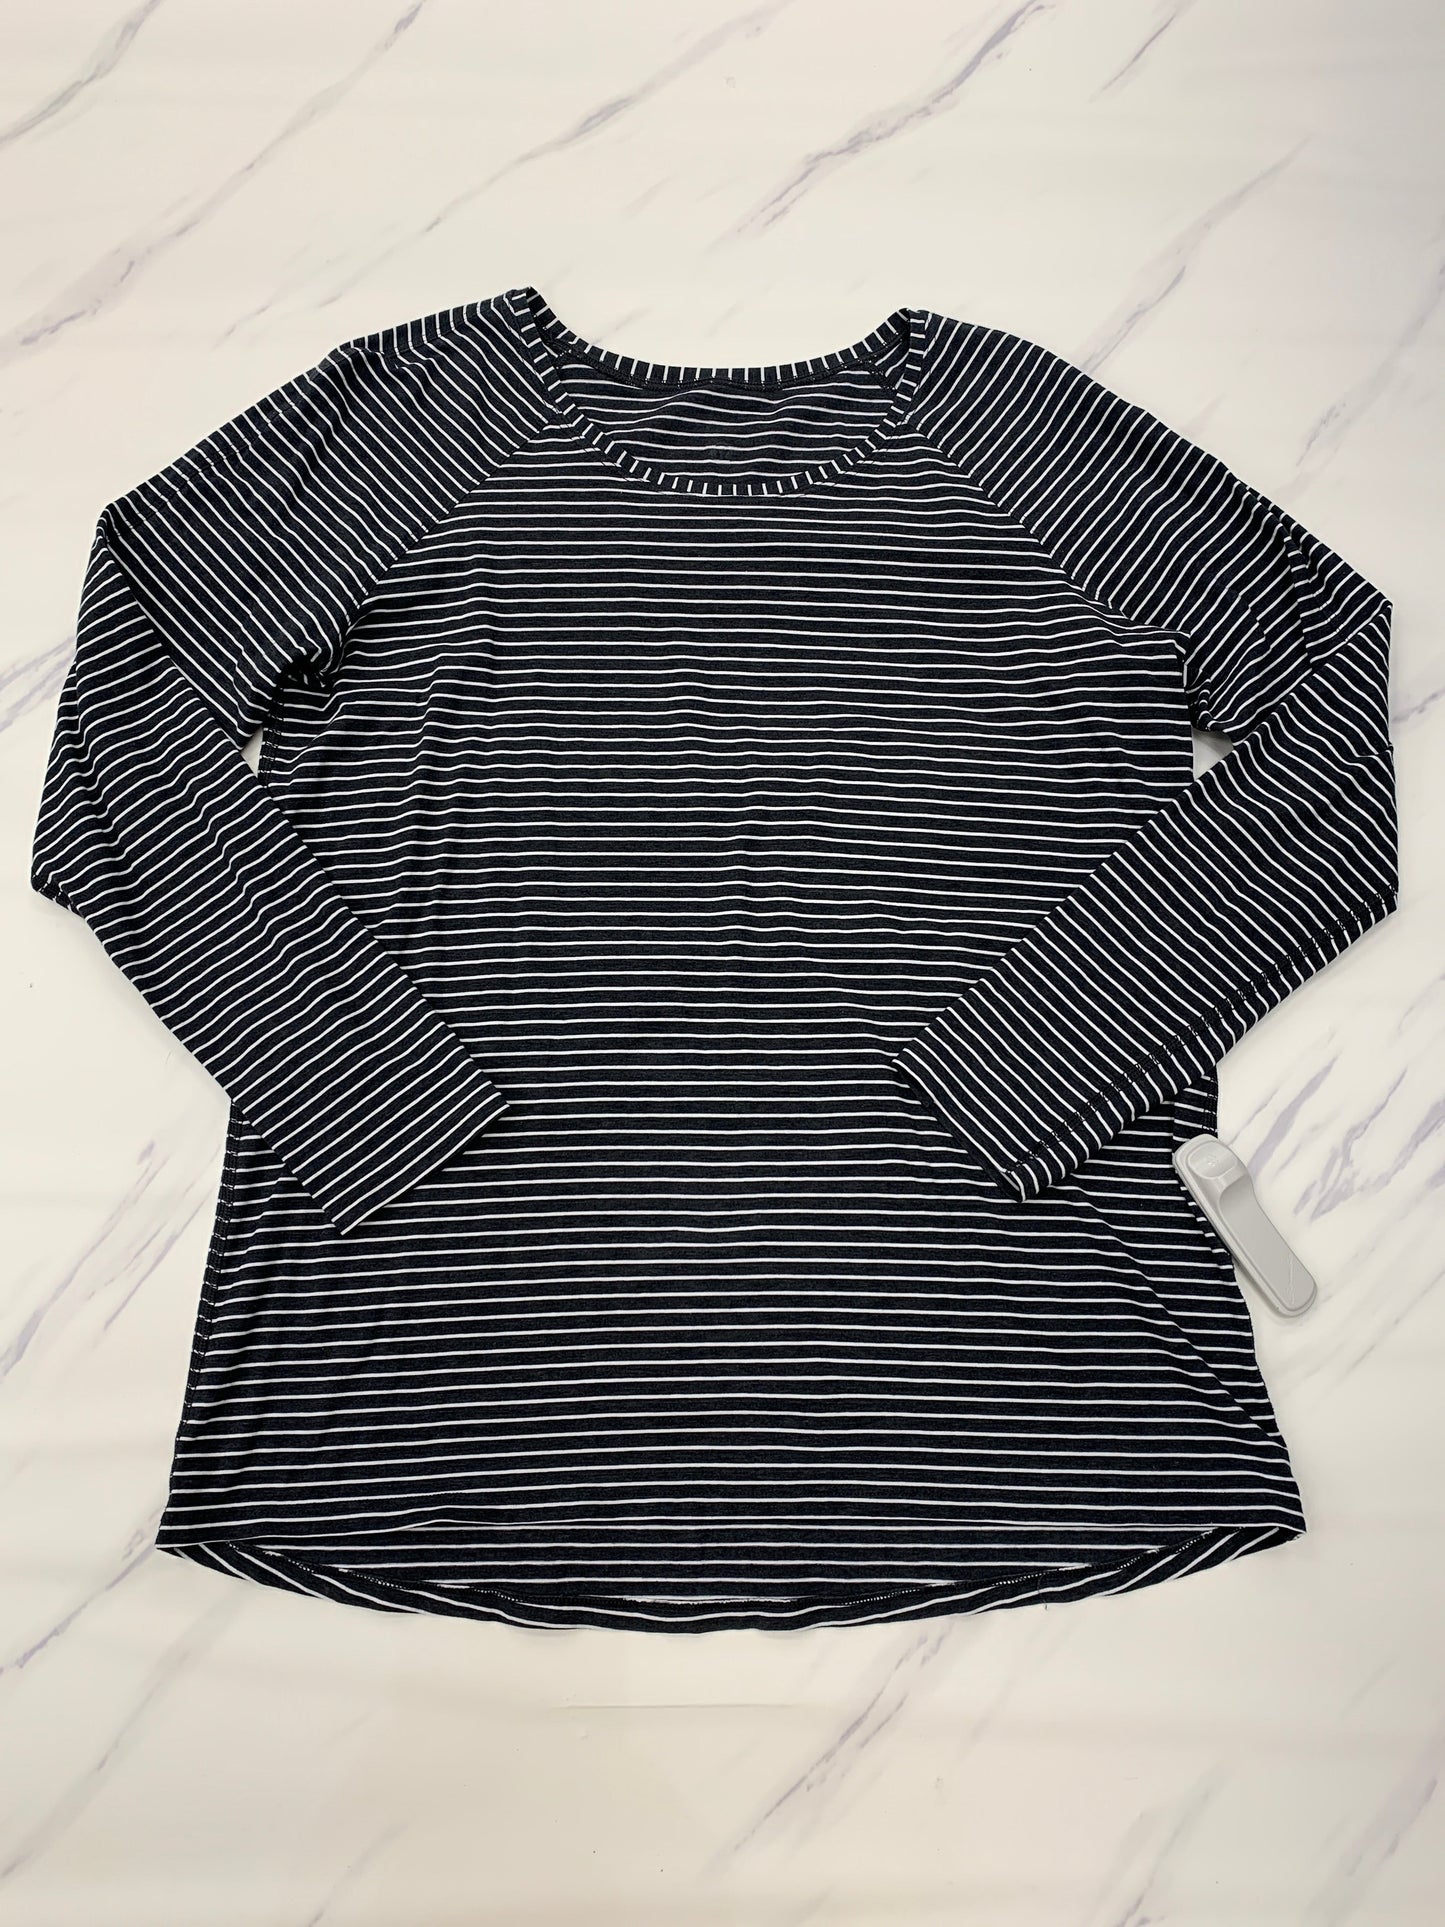 Striped Pattern Athletic Top Long Sleeve Collar Lululemon, Size 10